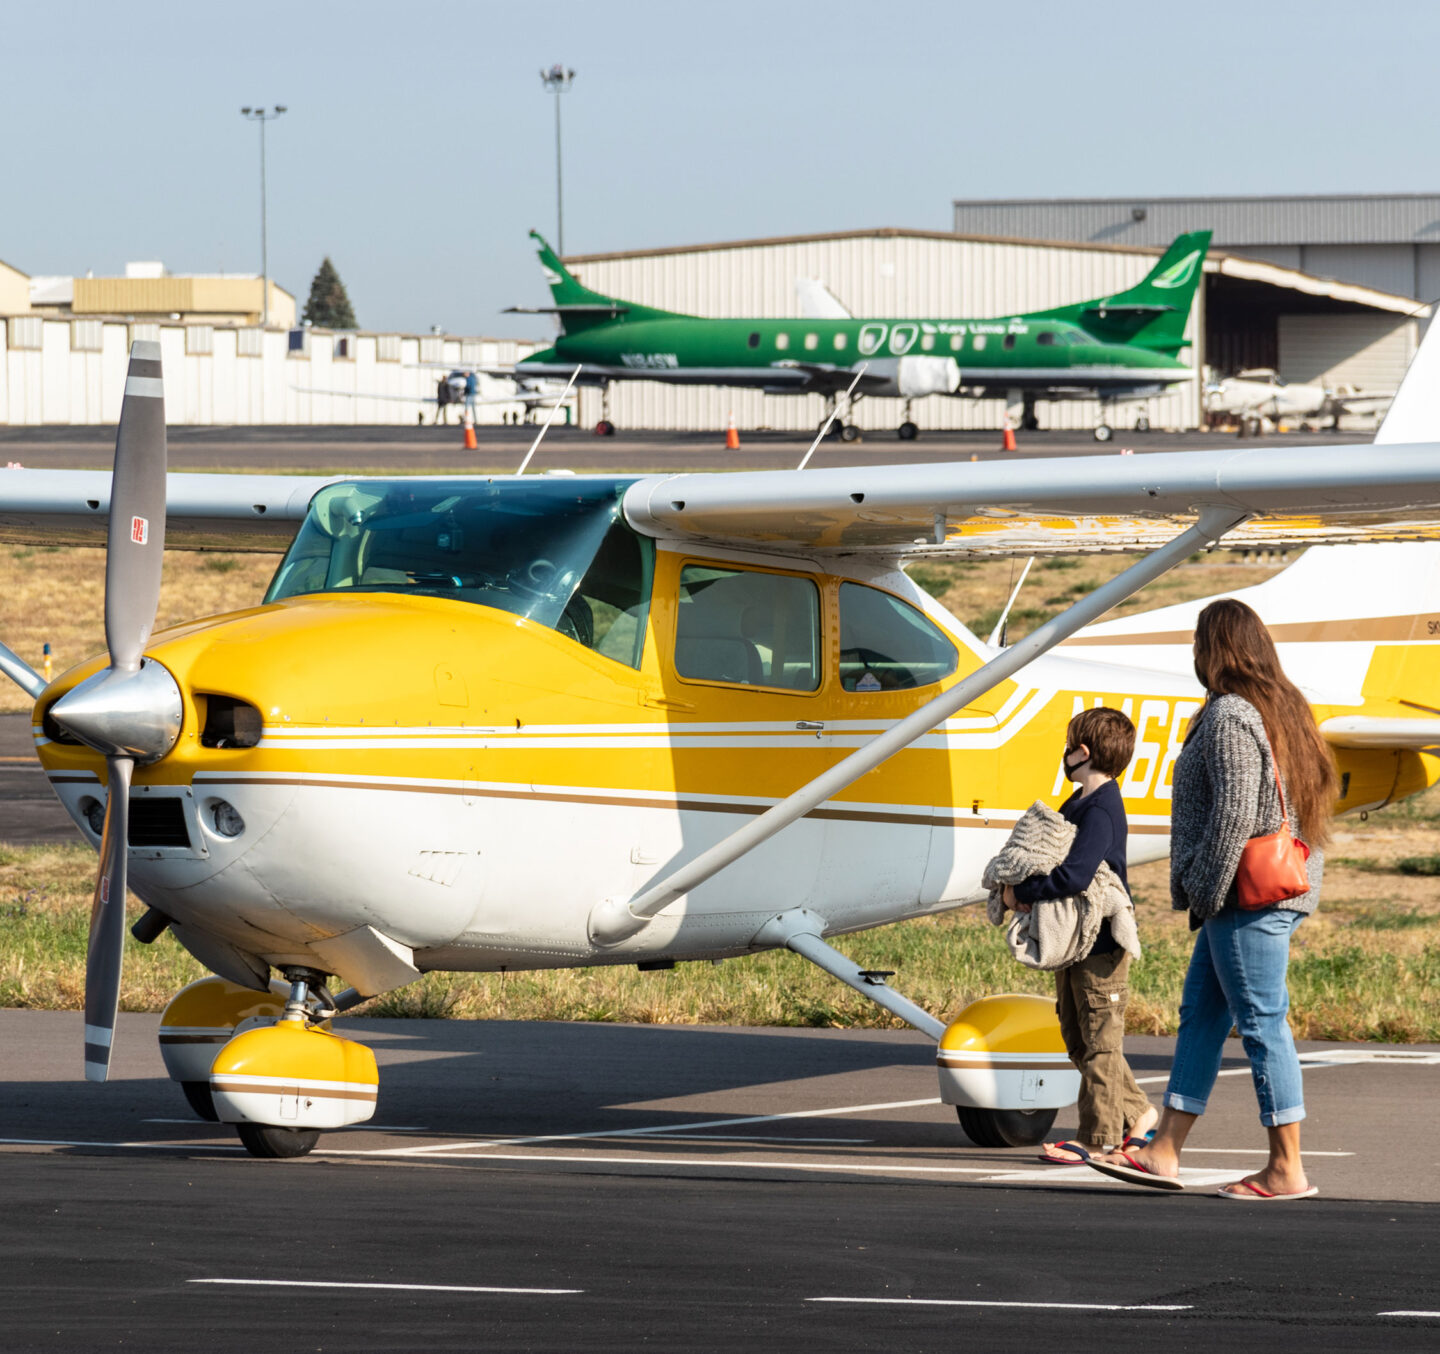 People view aircraft up close on the ramp